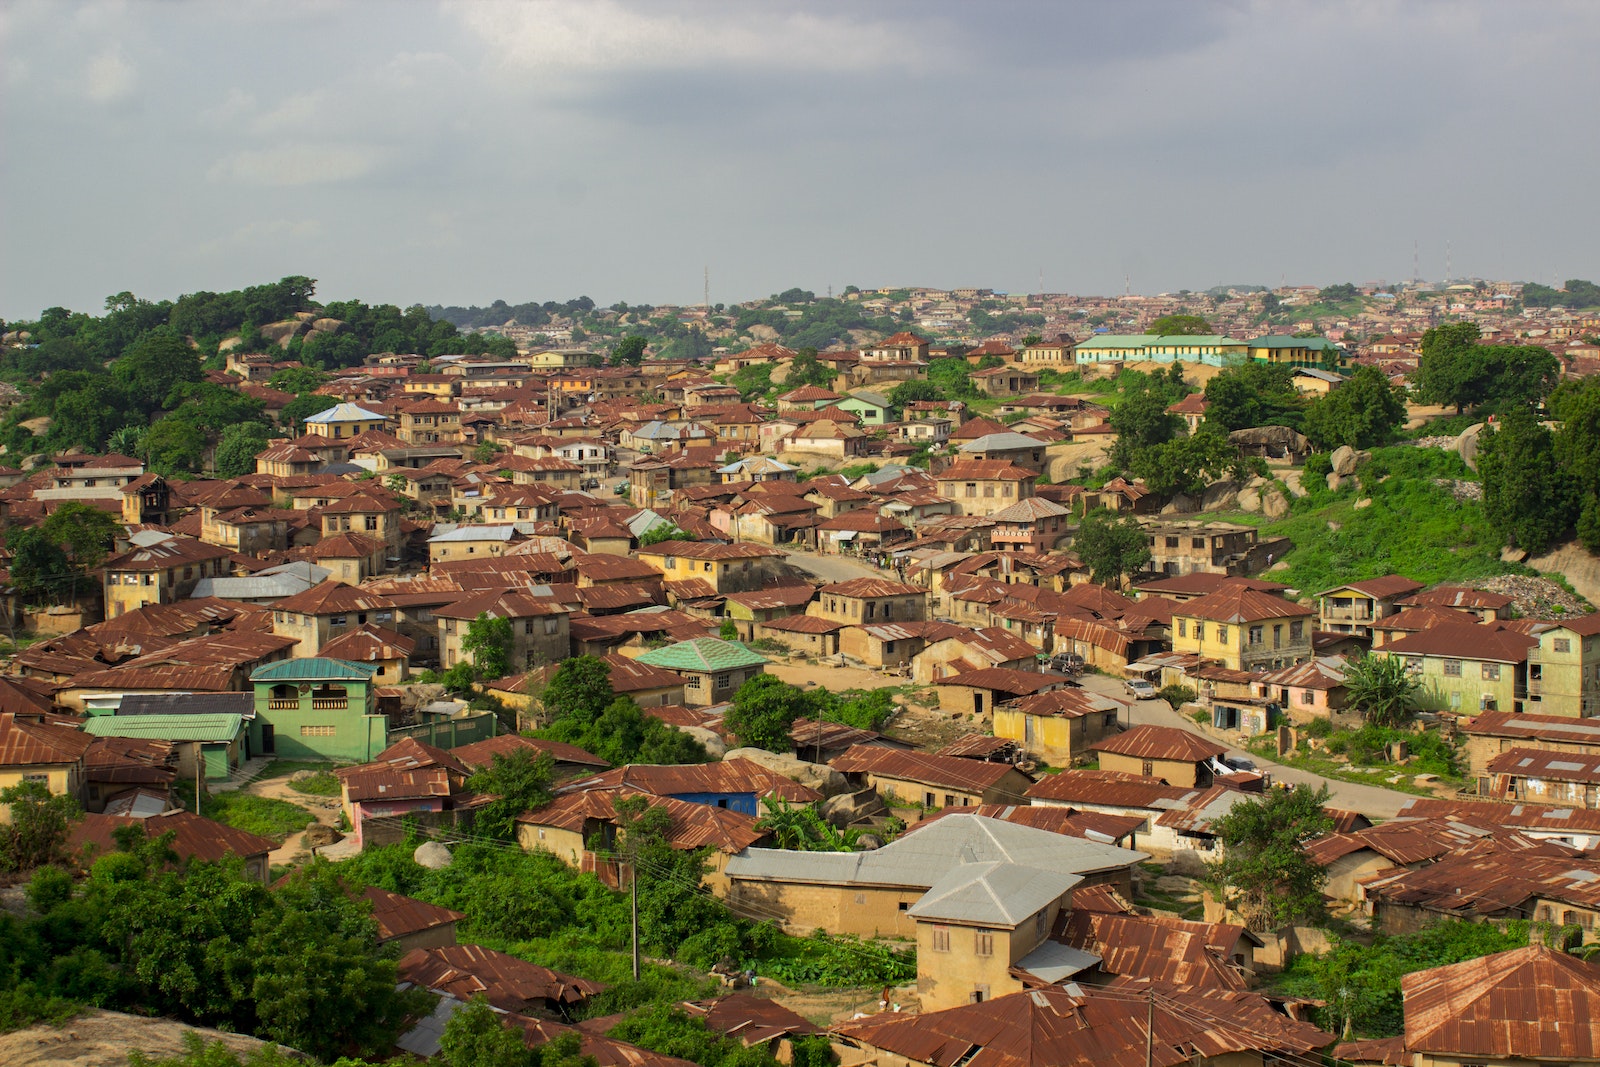 Top View of Houses and Building Roofs in Nigeria